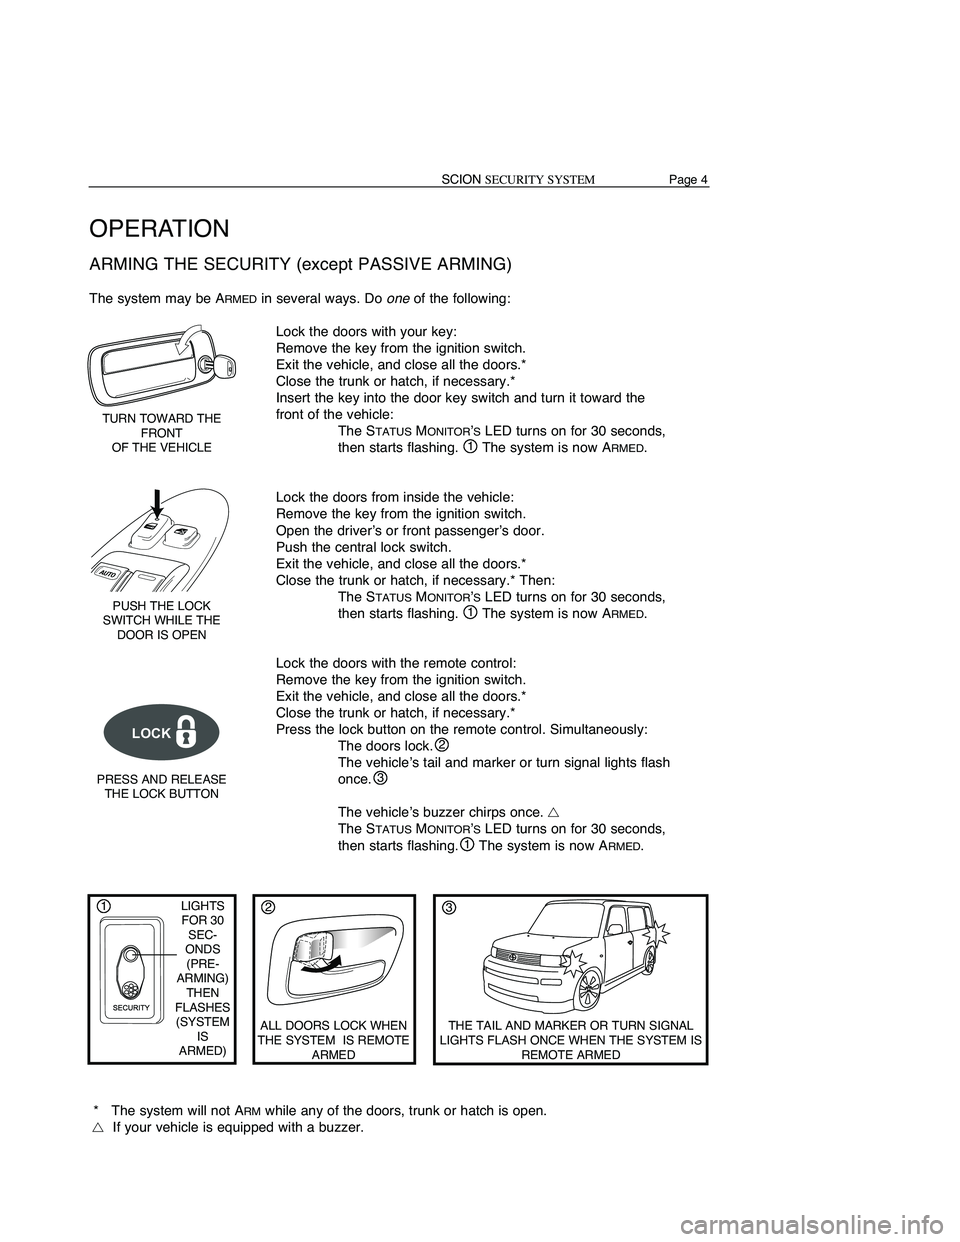 TOYOTA xD 2009  Accessories, Audio & Navigation (in English) Page7SCIONSECURITY SYSTEM
OPERATION
AUTOMAT ICREARMING
When youunlock thedoors usingtheremote control, theScion Security isDISARMEDat the same
time. However, ifyou donot open adoor within 30seconds, t